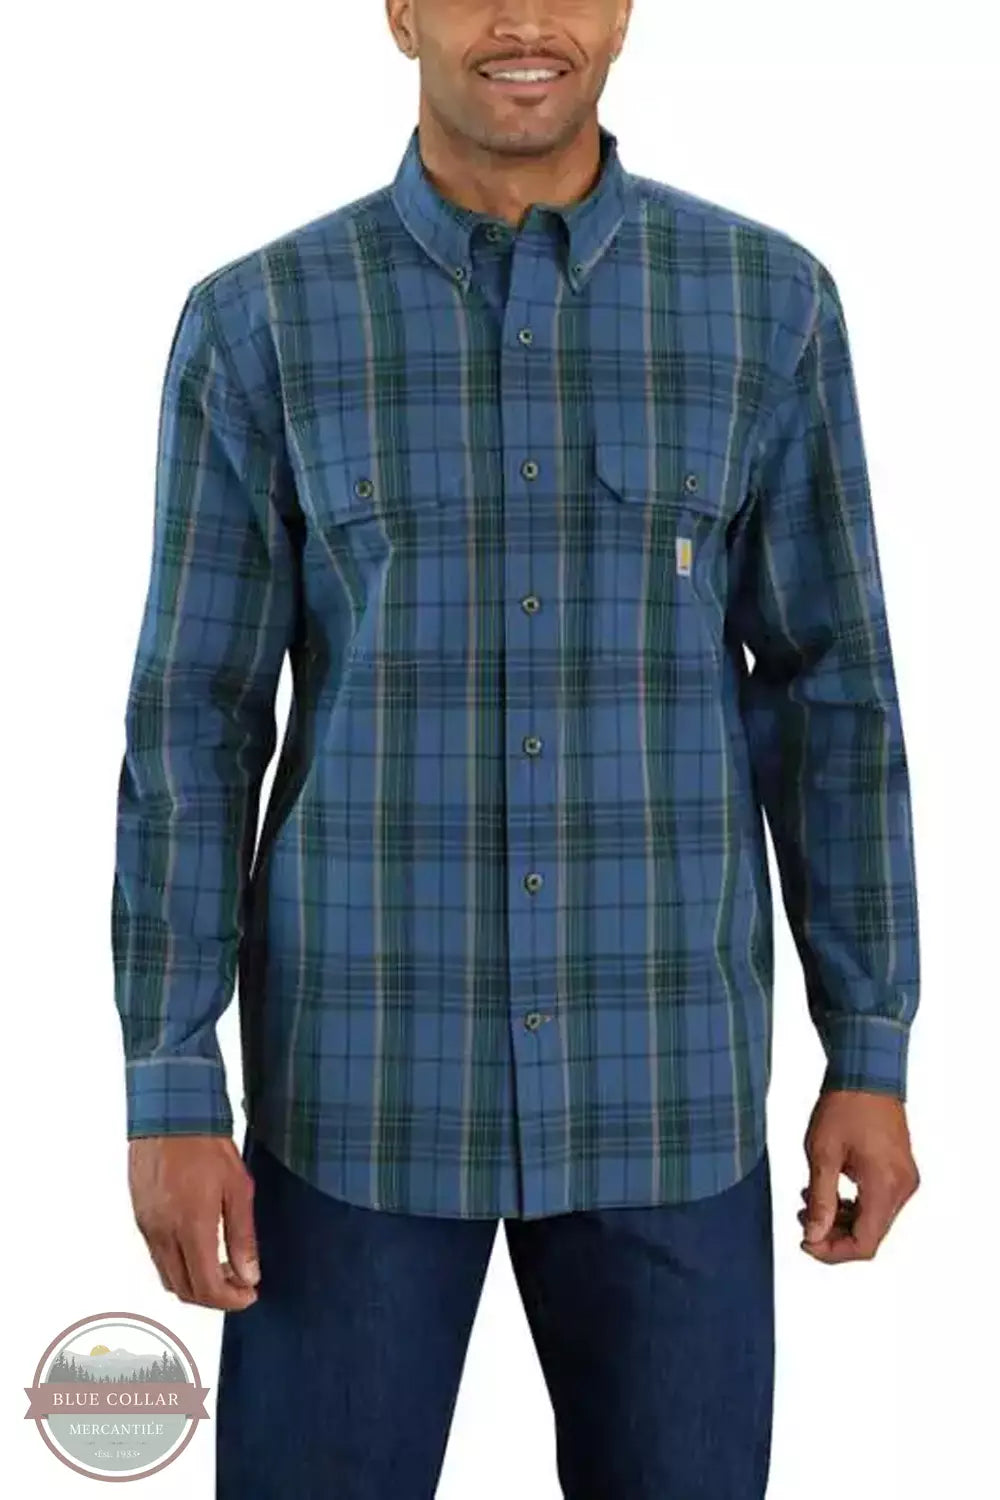 Carhartt 105946 Loose Fit Midweight Chambray Button Down Long Sleeve Shirt in Plaid Dark Blue Model Front View